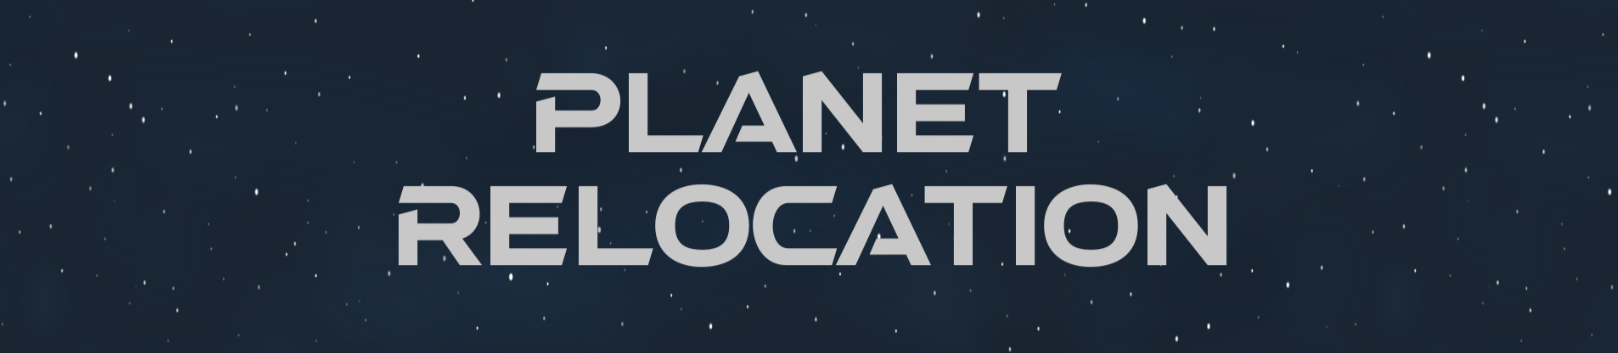 Planet Relocation